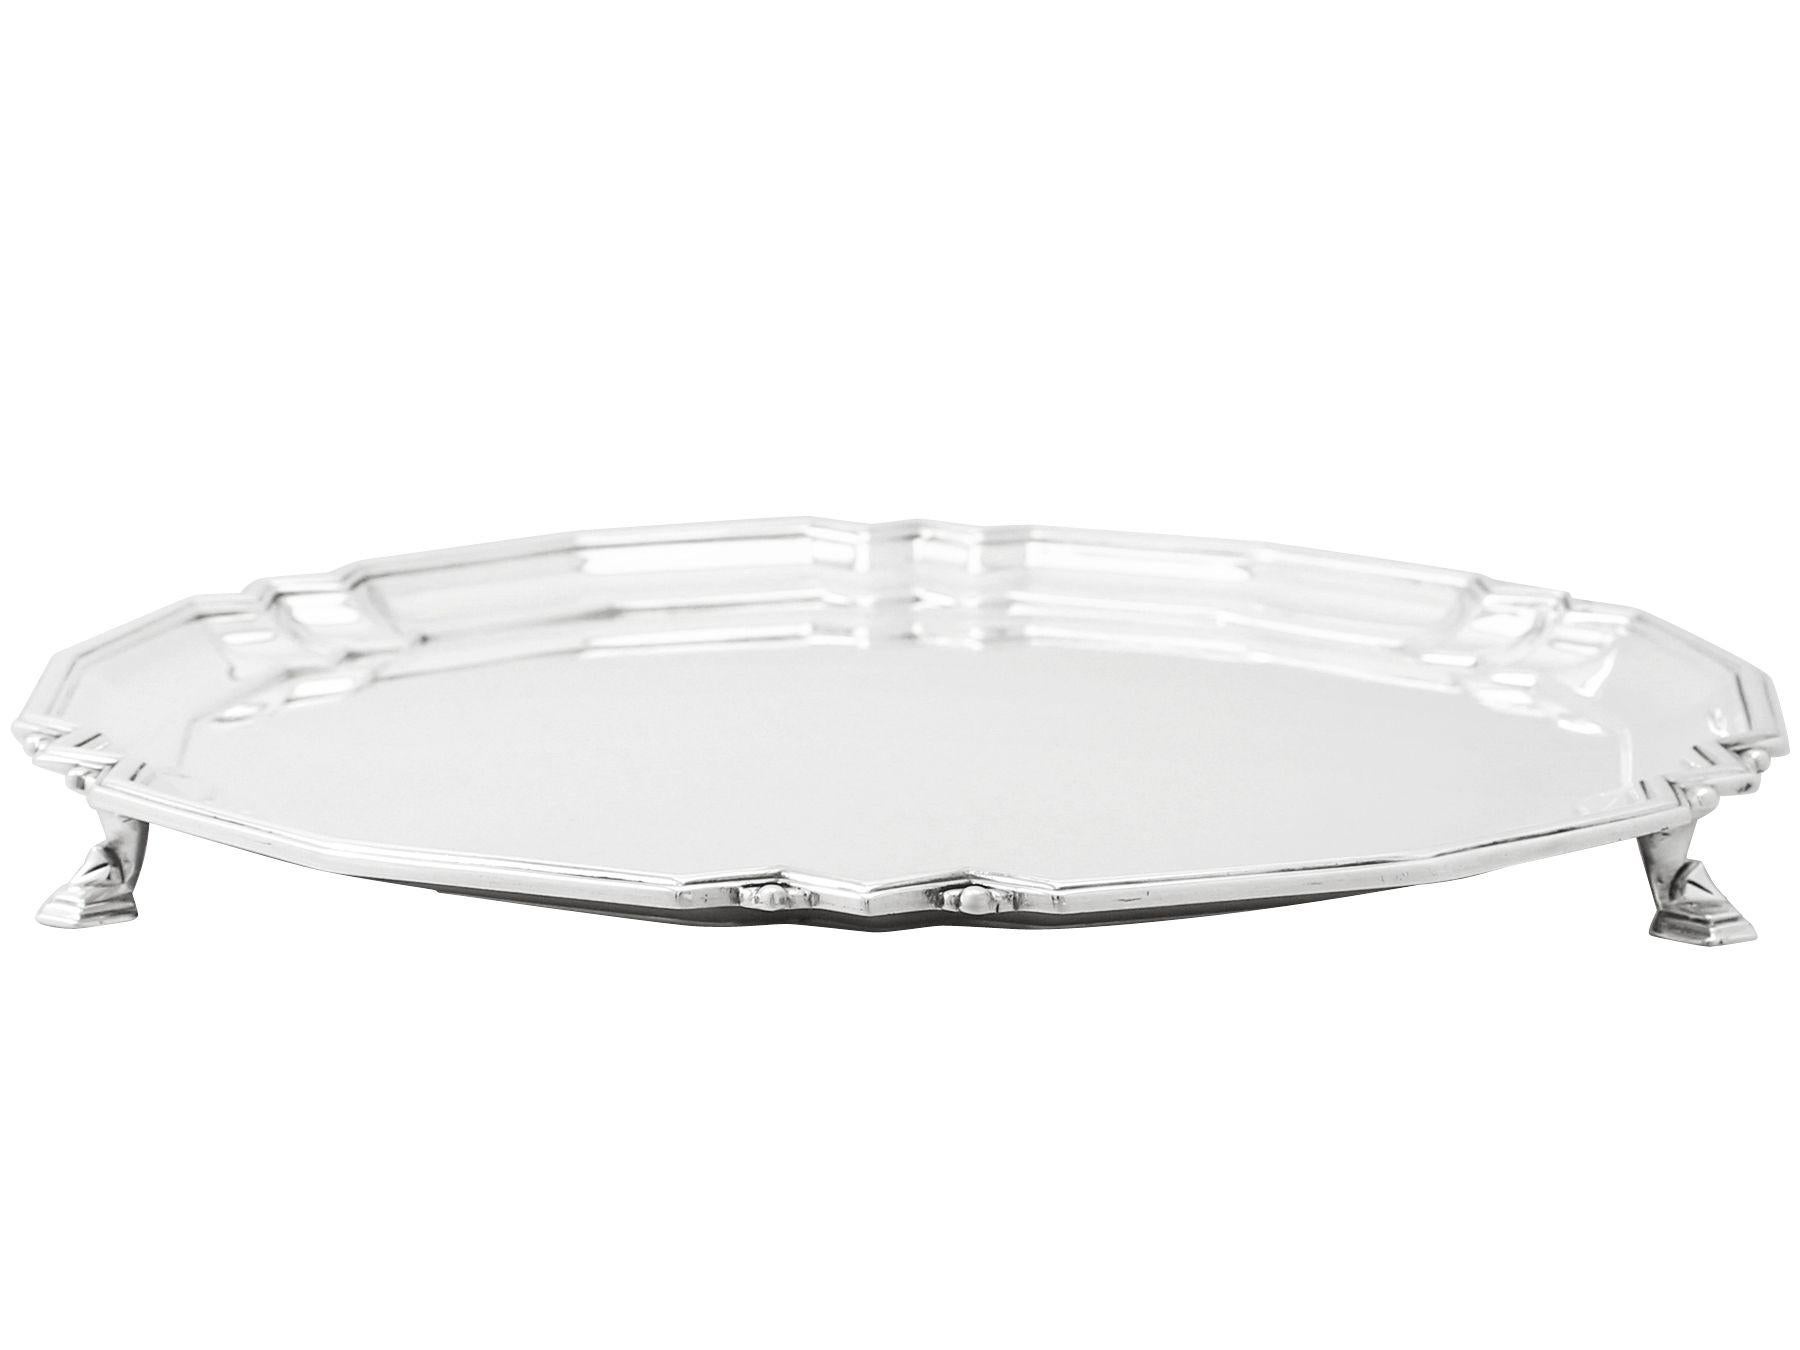 An exceptional, fine and impressive antique Edward VIII English sterling silver salver made in the Art Deco style; an addition to our silver dining collection

This exceptional antique Edward VIII English sterling silver salver has a circular shaped